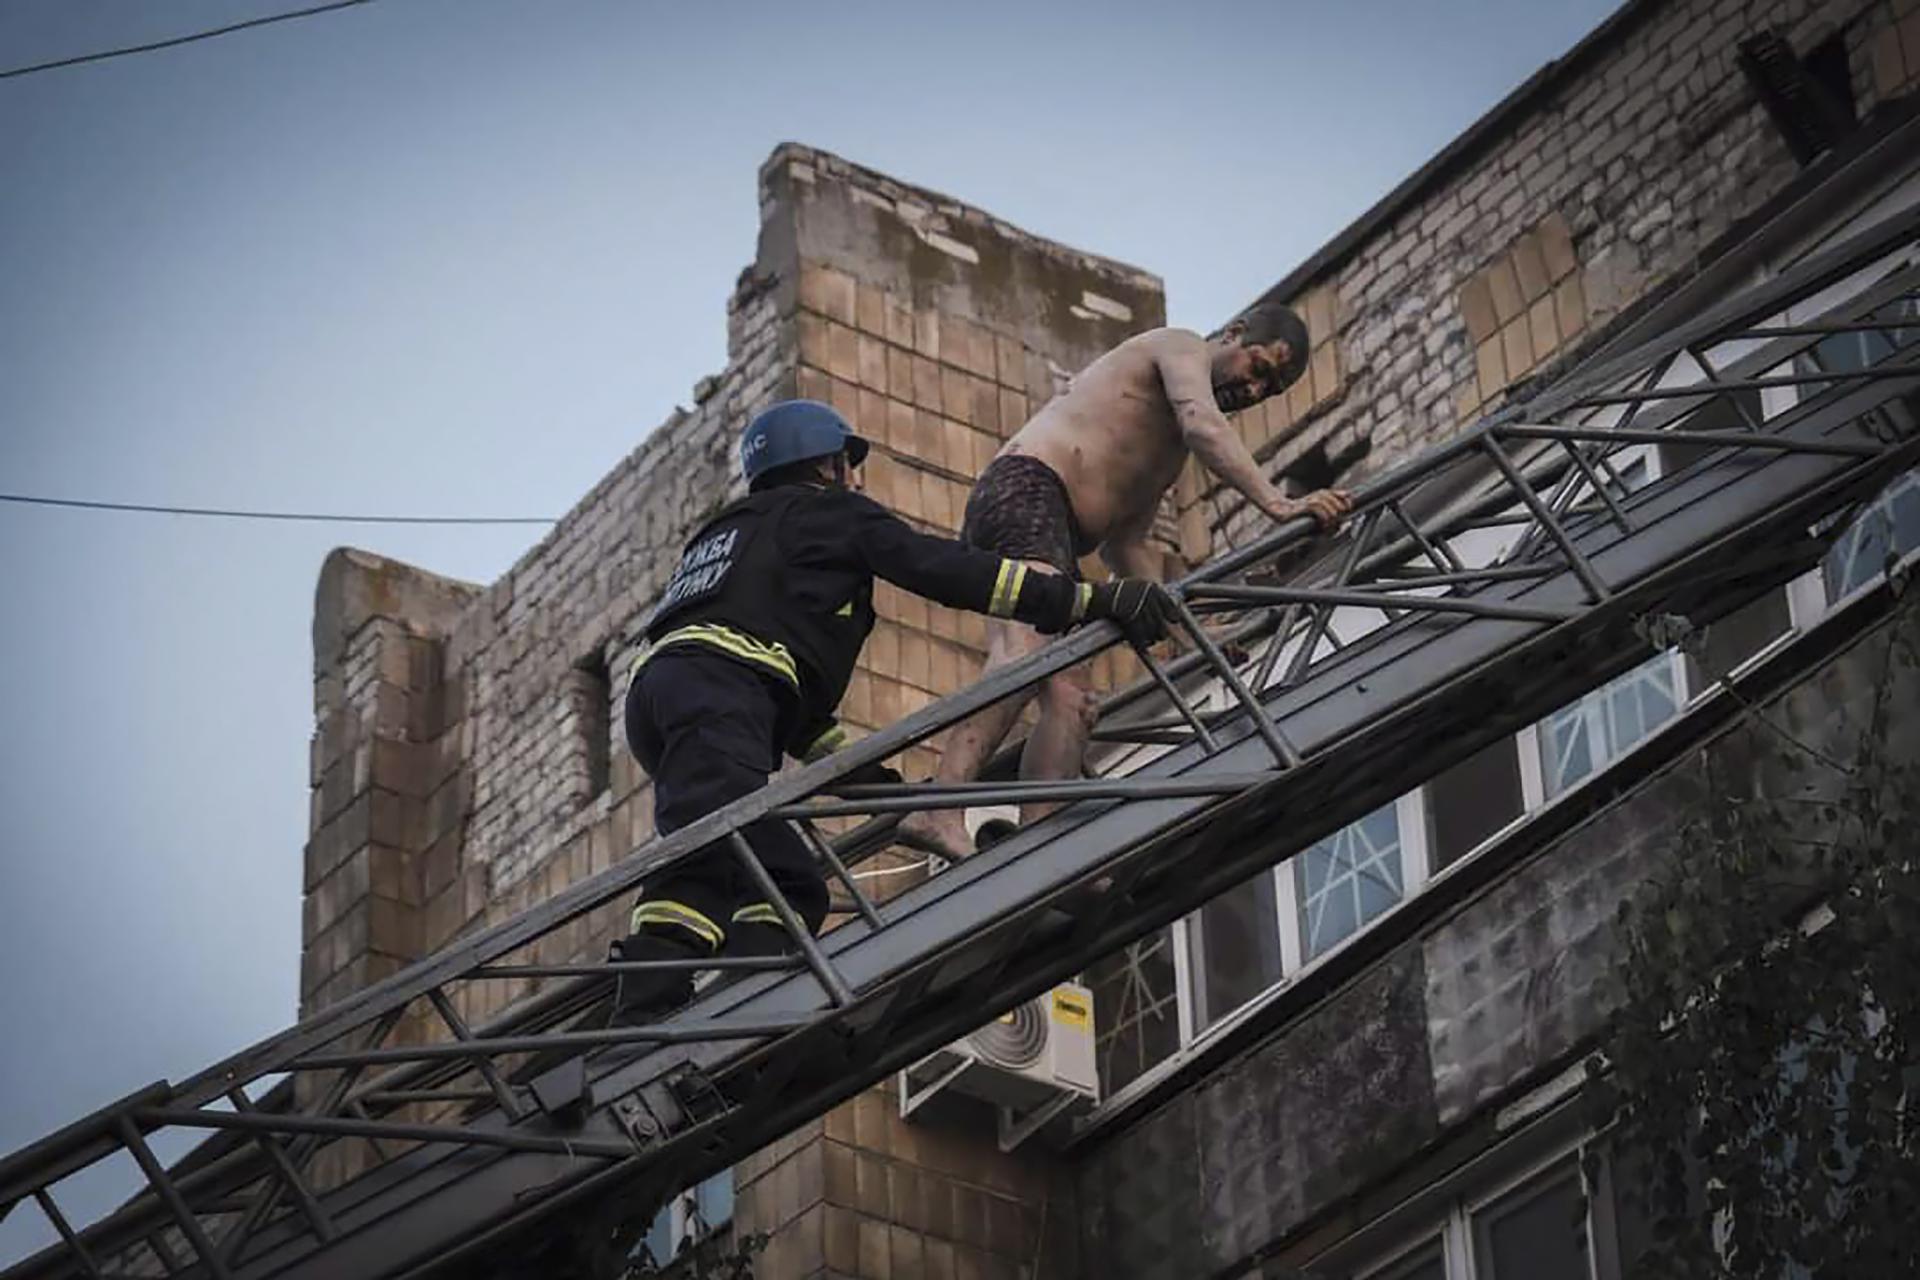 A handout photo made available by the State Emergency Service shows Ukrainian rescuers working on a site where a rocket hit the city of Pokrovsk, Donetsk area, Ukraine, 07 August 2023. EFE-EPA/STATE EMERGENCY SERVICE HANDOUT EDITORIAL USE ONLY/NO SALES
